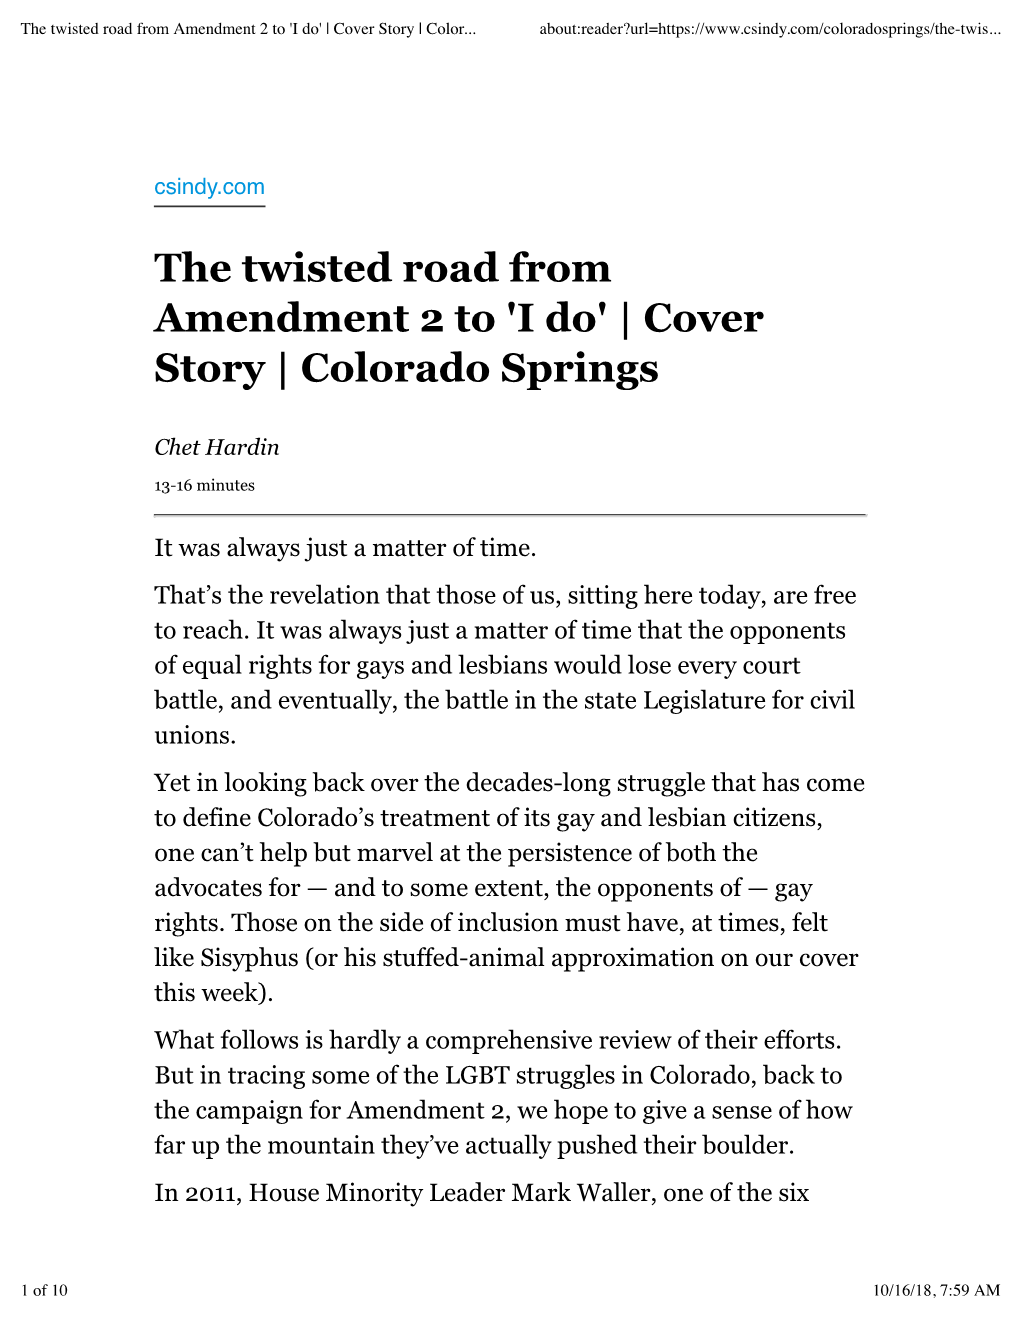 The Twisted Road from Amendment 2 to 'I Do' | Cover Story | Colorado Springs